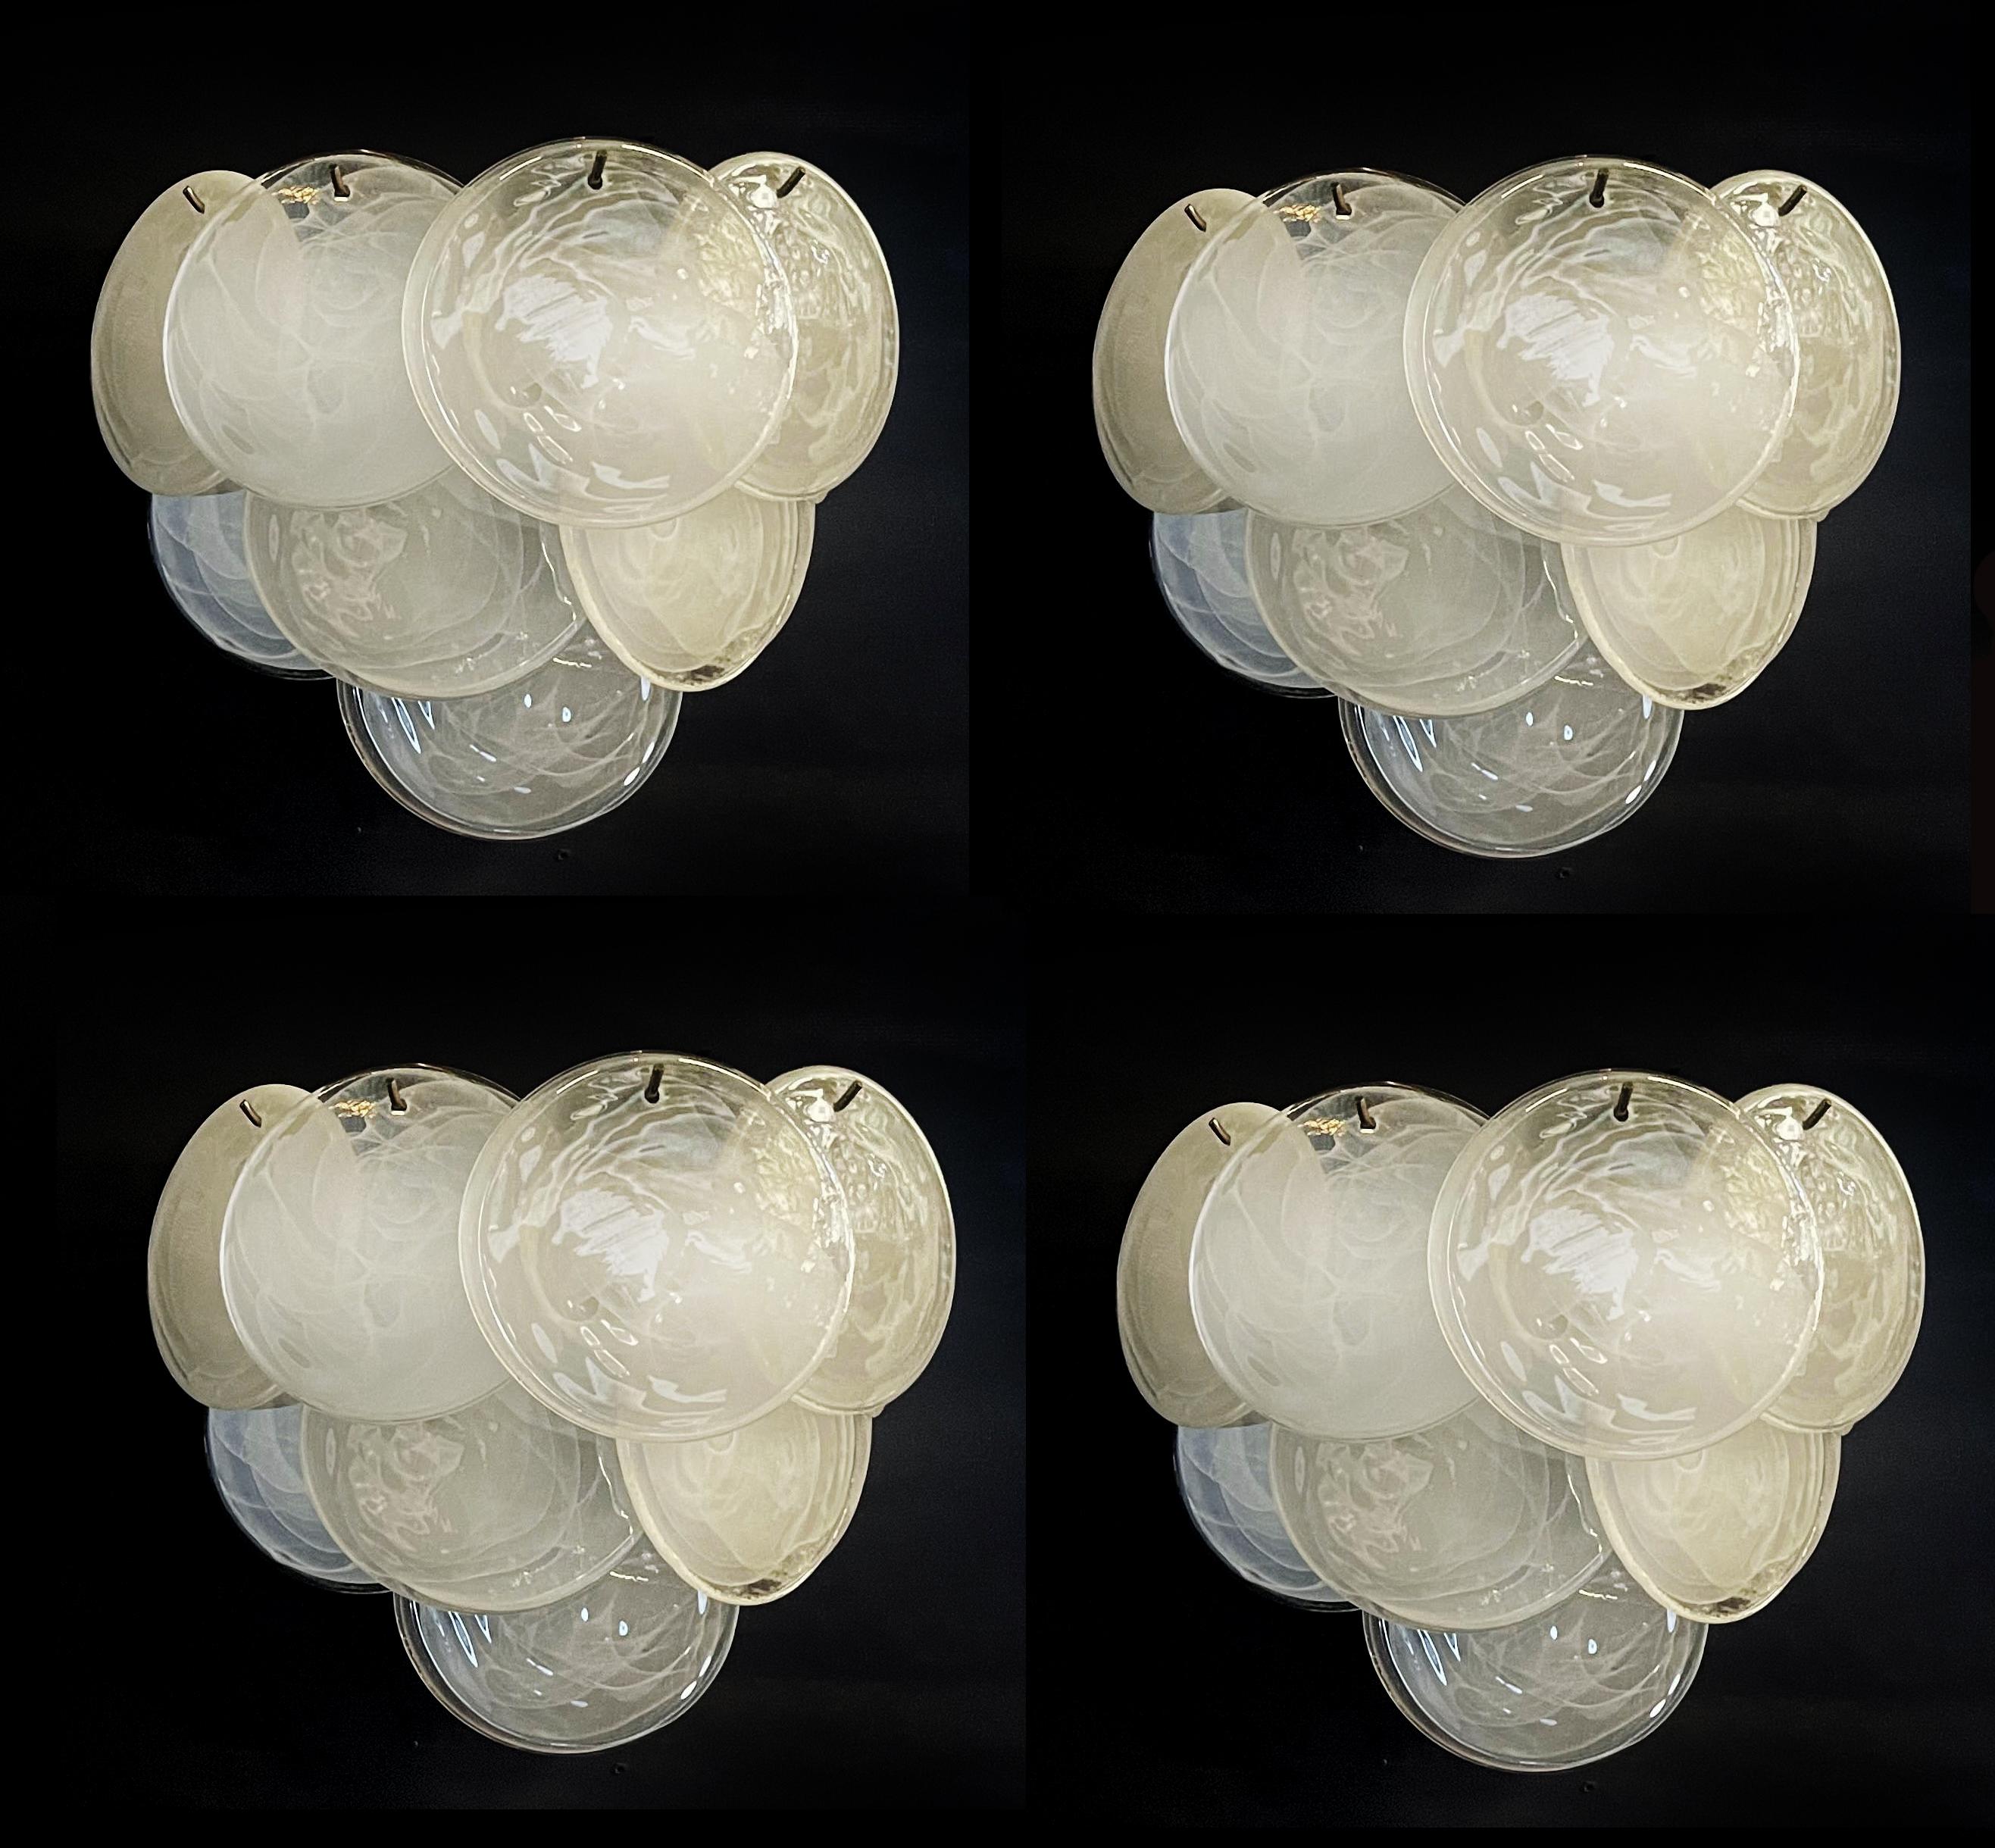 Four Vintage Italian Murano sconces in Vistosi style. Wall lights have 10 alabaster iridescent glasses for each. Nickel metal frame.
Period: late XX century
Dimensions:11 inches (28 cm) height; 13,40 inches (34 cm) width; 7,10 inches (18 cm) depth